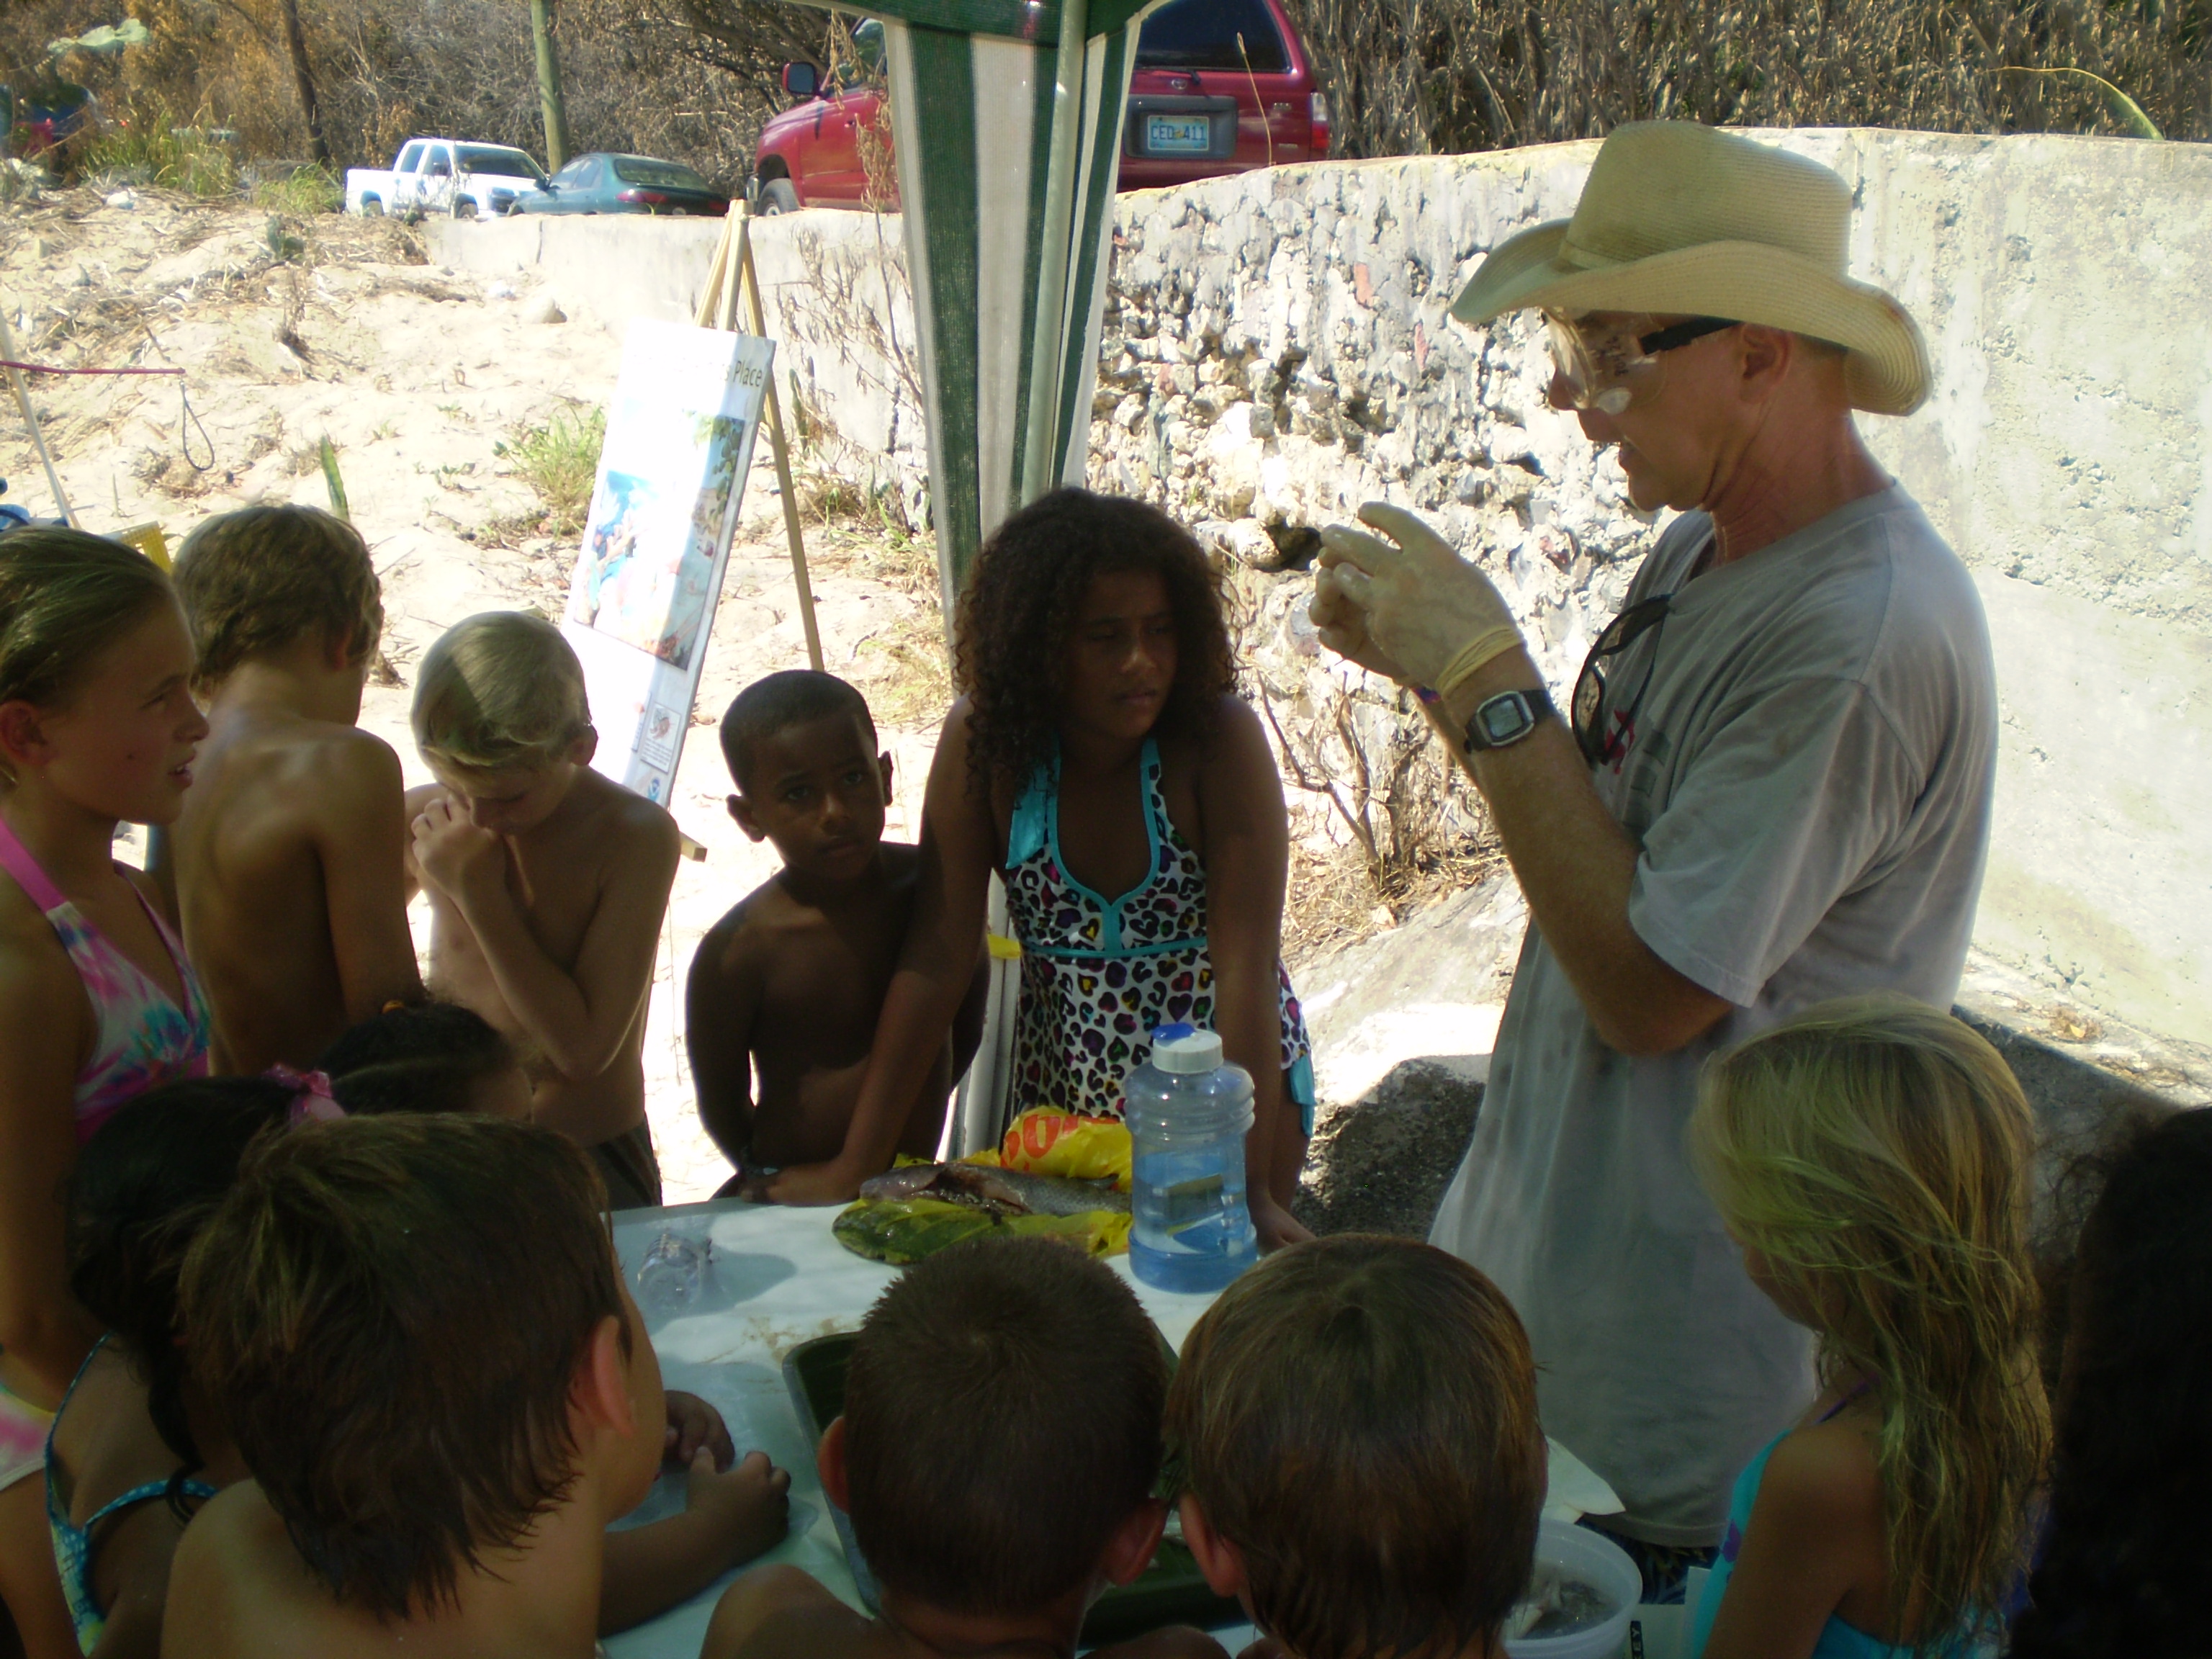 St. Croix Central High teacher Steve Cohen dissecting a squid at Reef Jam.